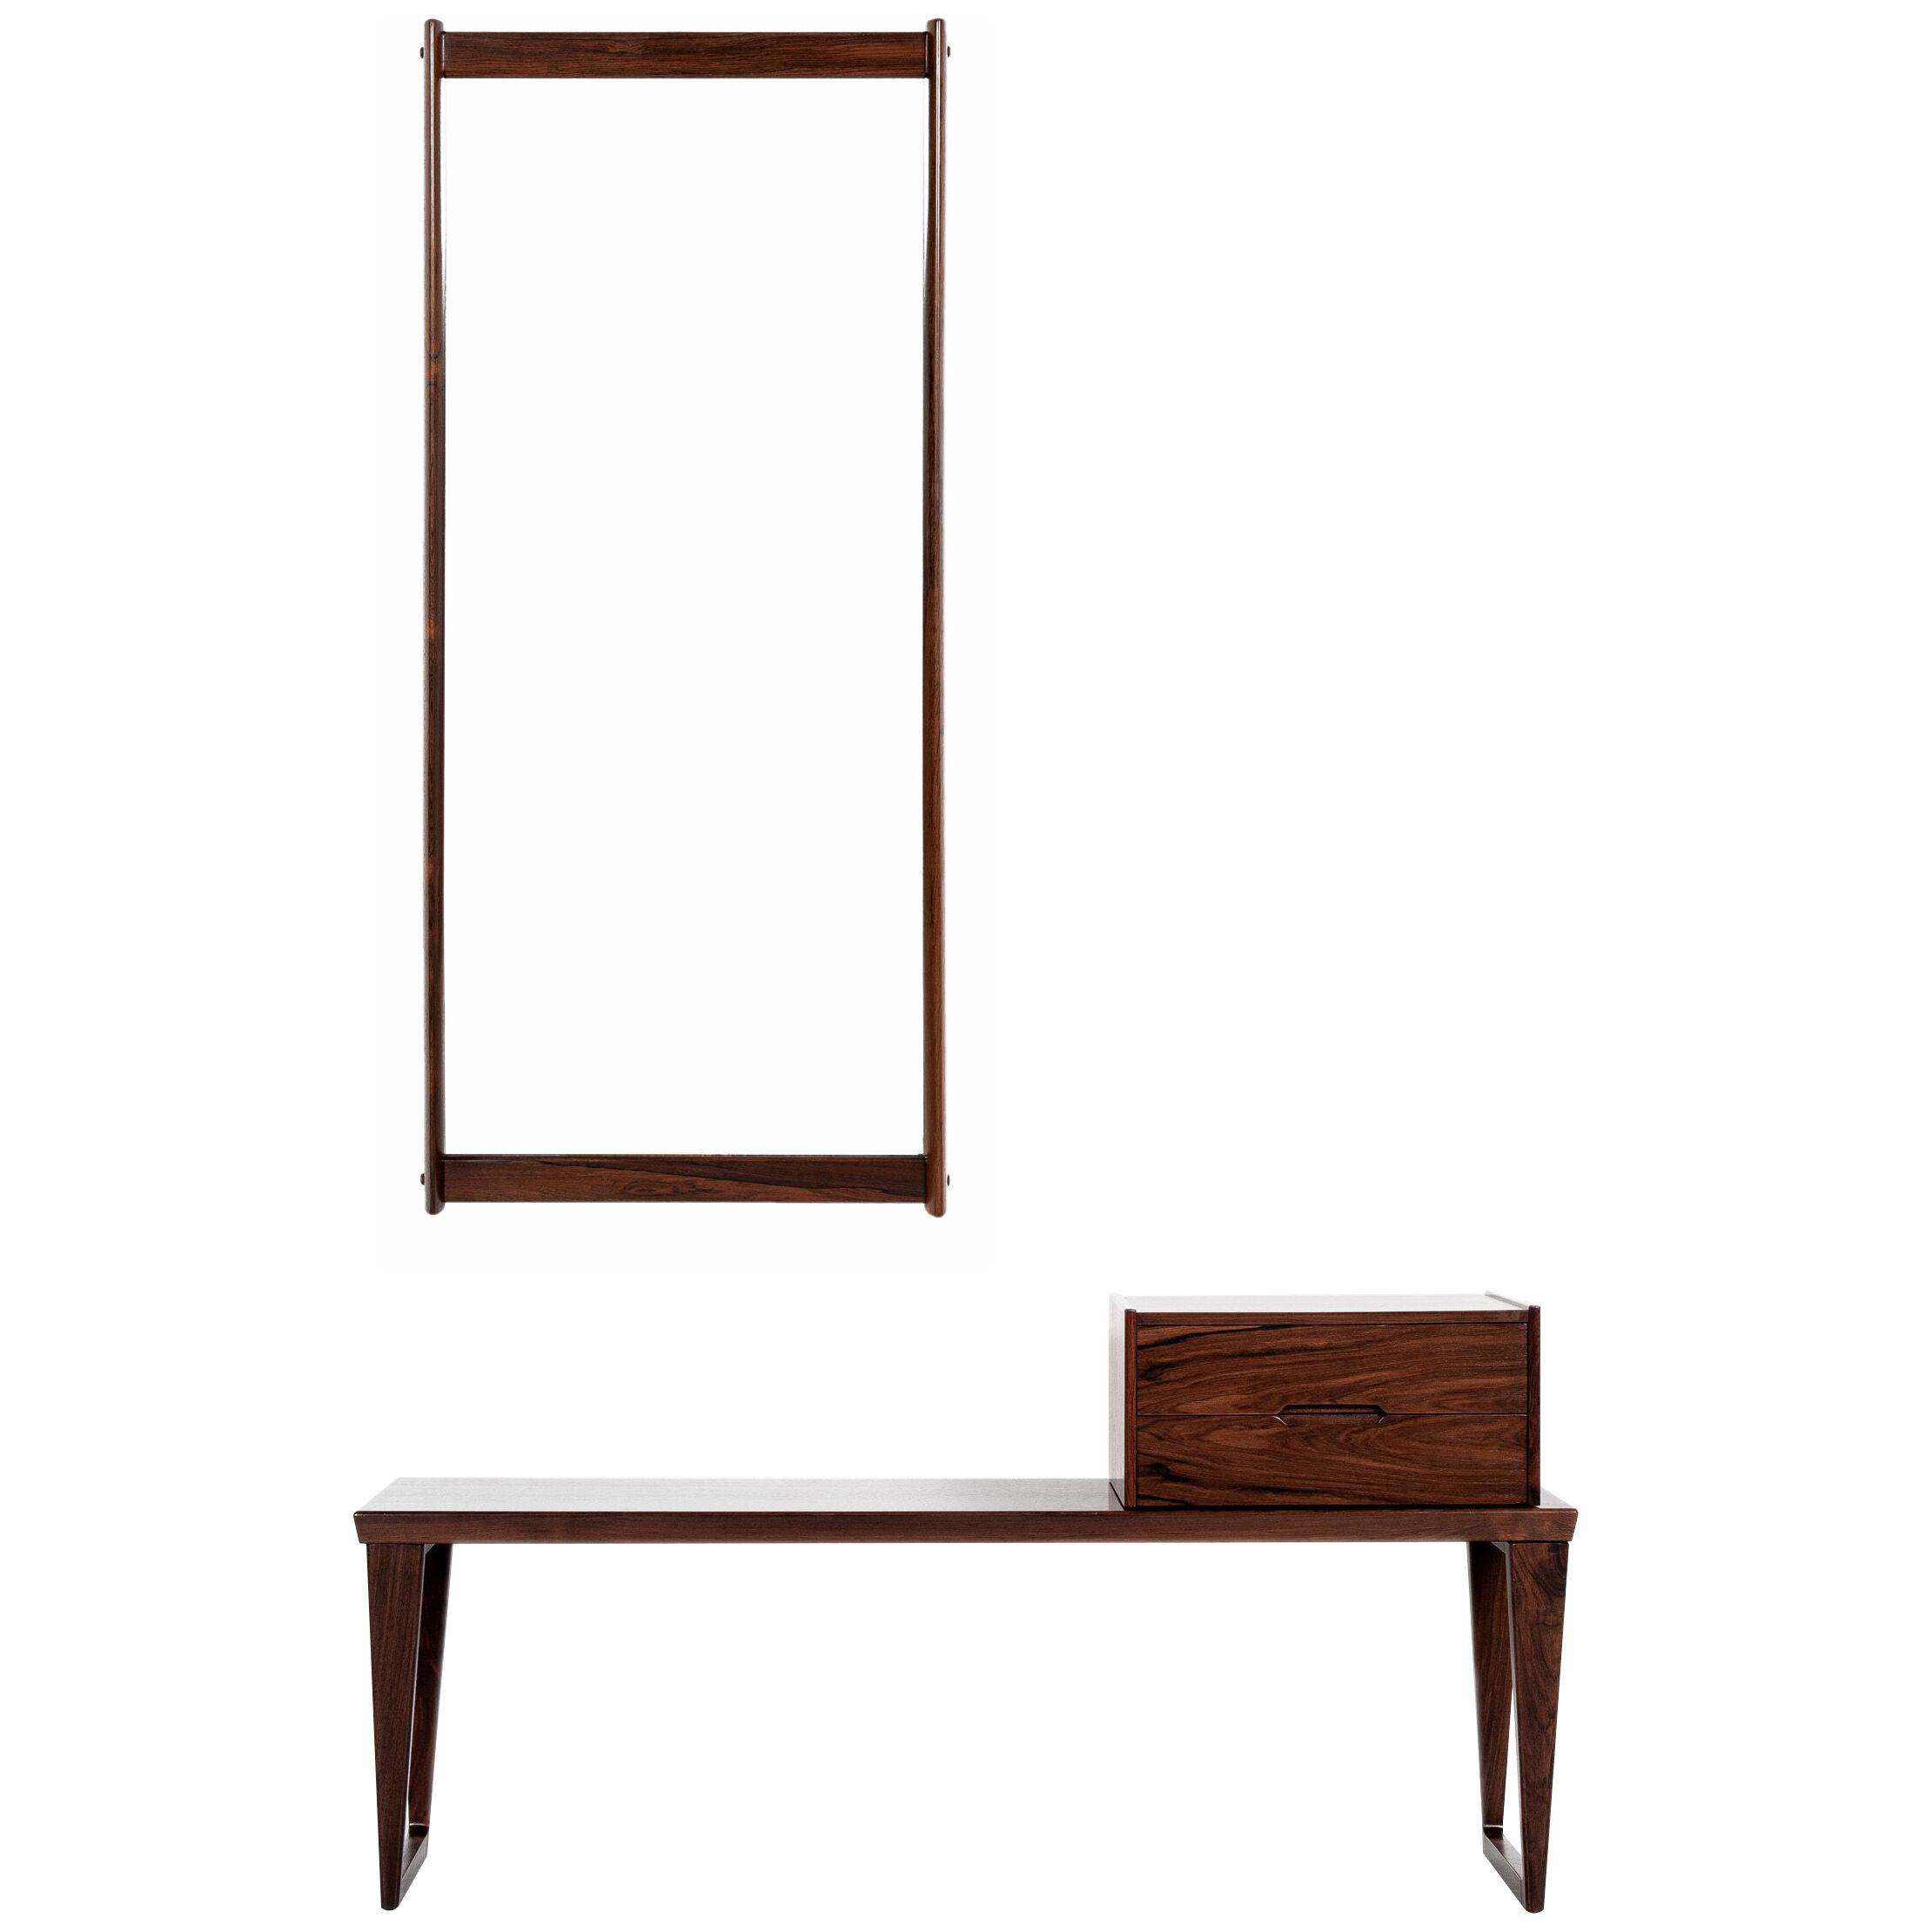 Midcentury mirror, bench and container in rosewood by Aksel Kjersgaard 1960s